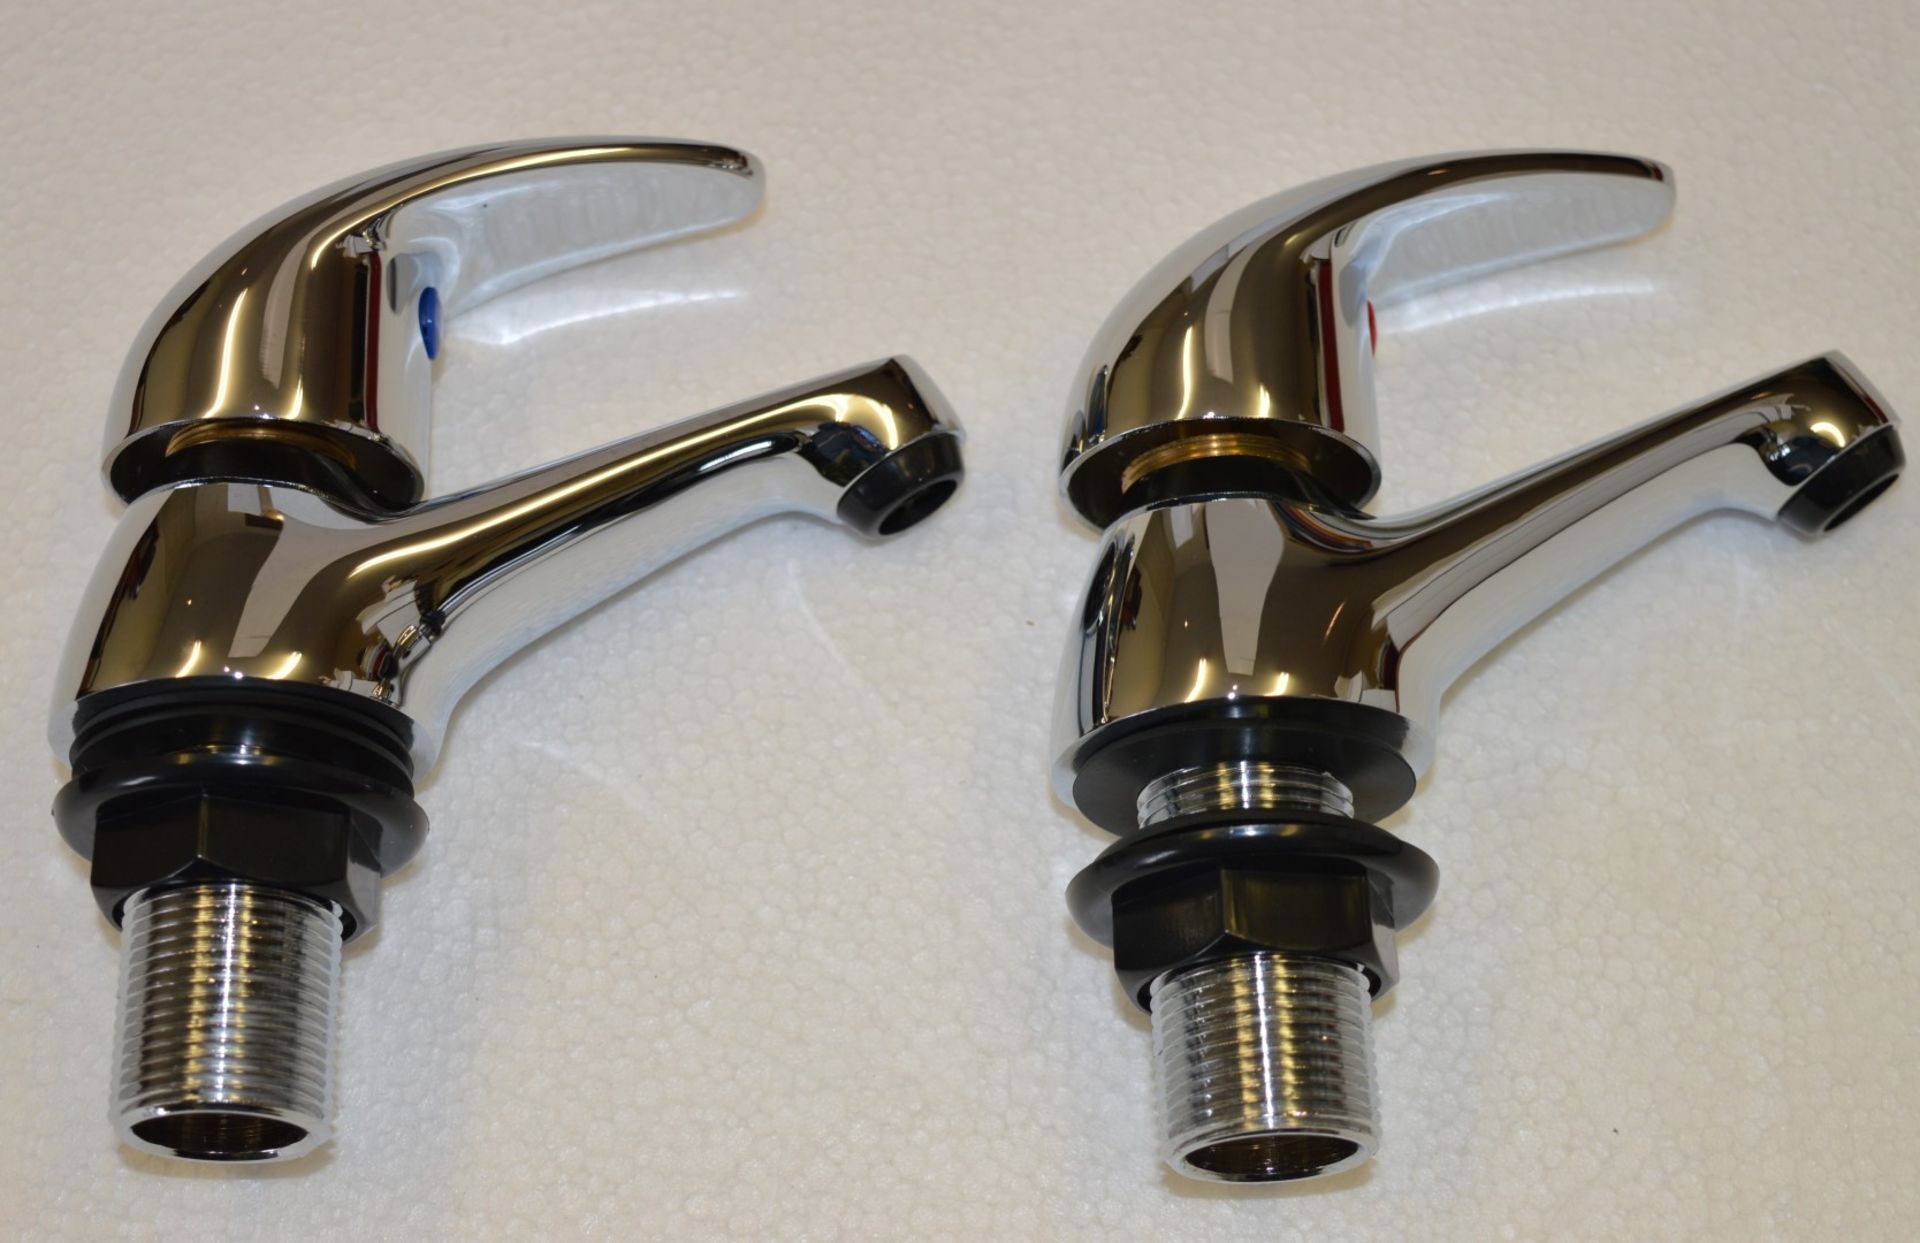 1 x Vogue Carmina Bath Taps - Pair Of - Vogue Bathrooms Gold Brassware Collection - High Quality - Image 3 of 6